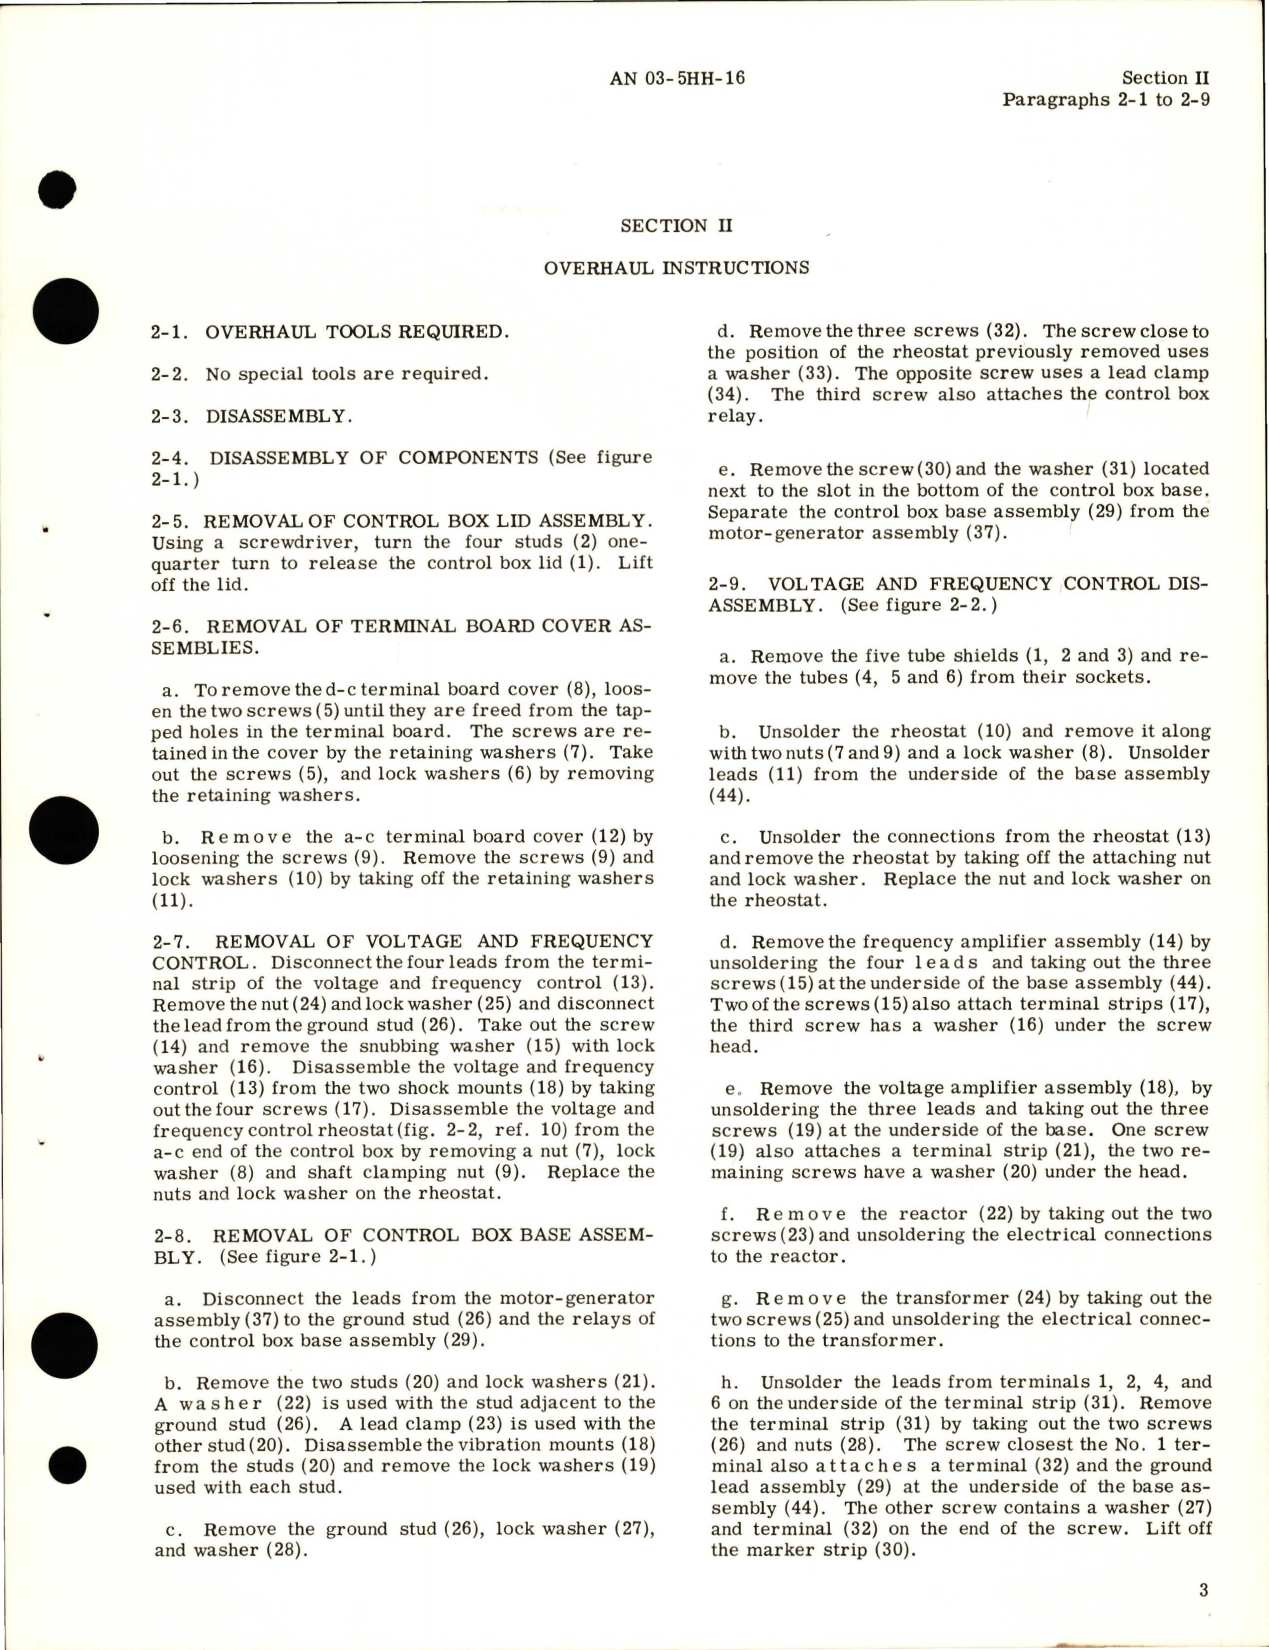 Sample page 7 from AirCorps Library document: Overhaul Instructions for Inverter - Parts SE-5-1 and SE-5-2